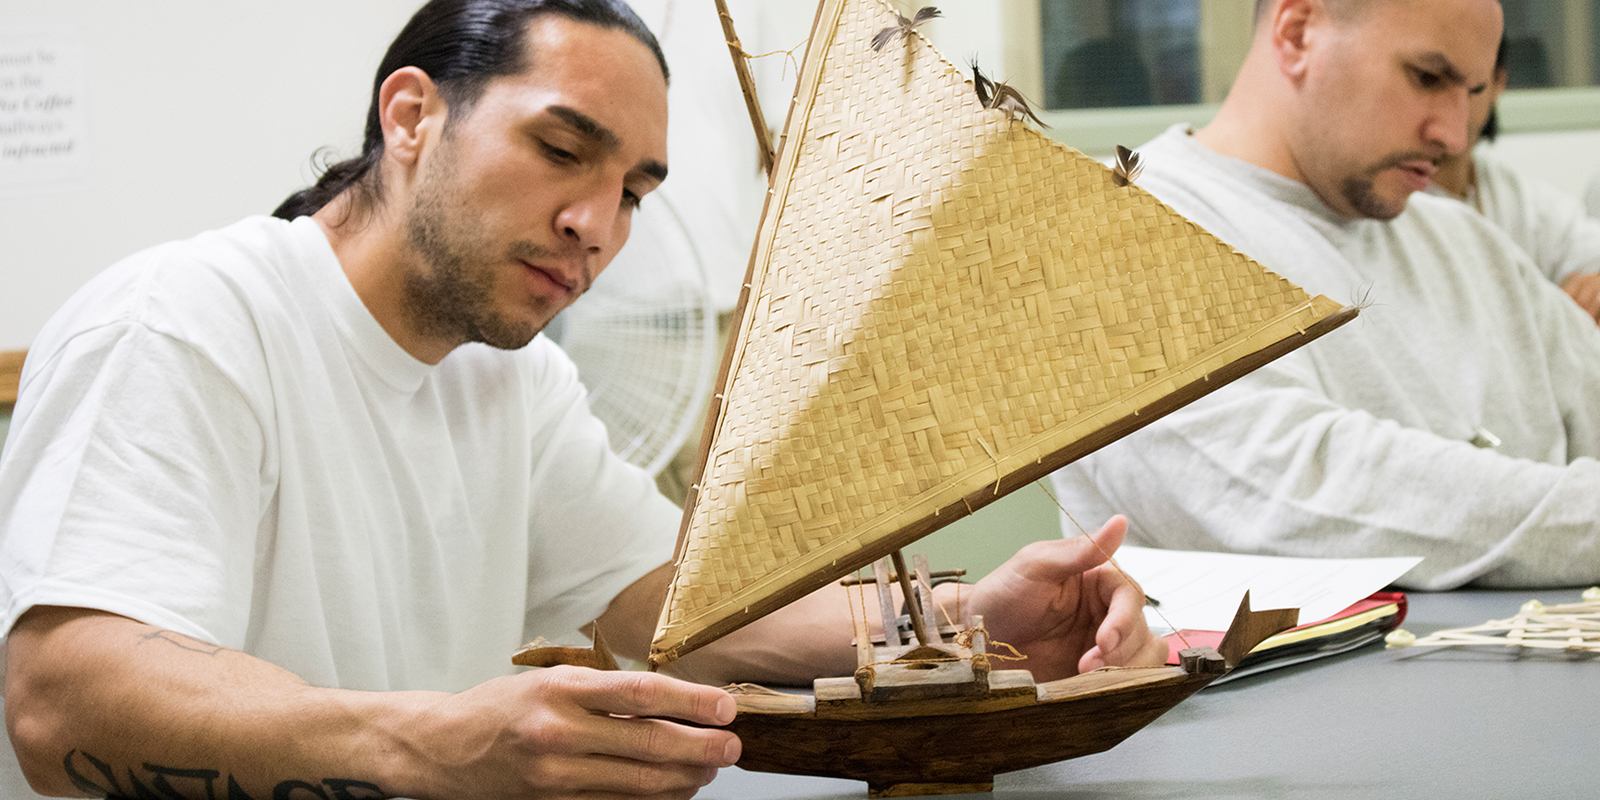 a man examines the details on a model outrigger canoe